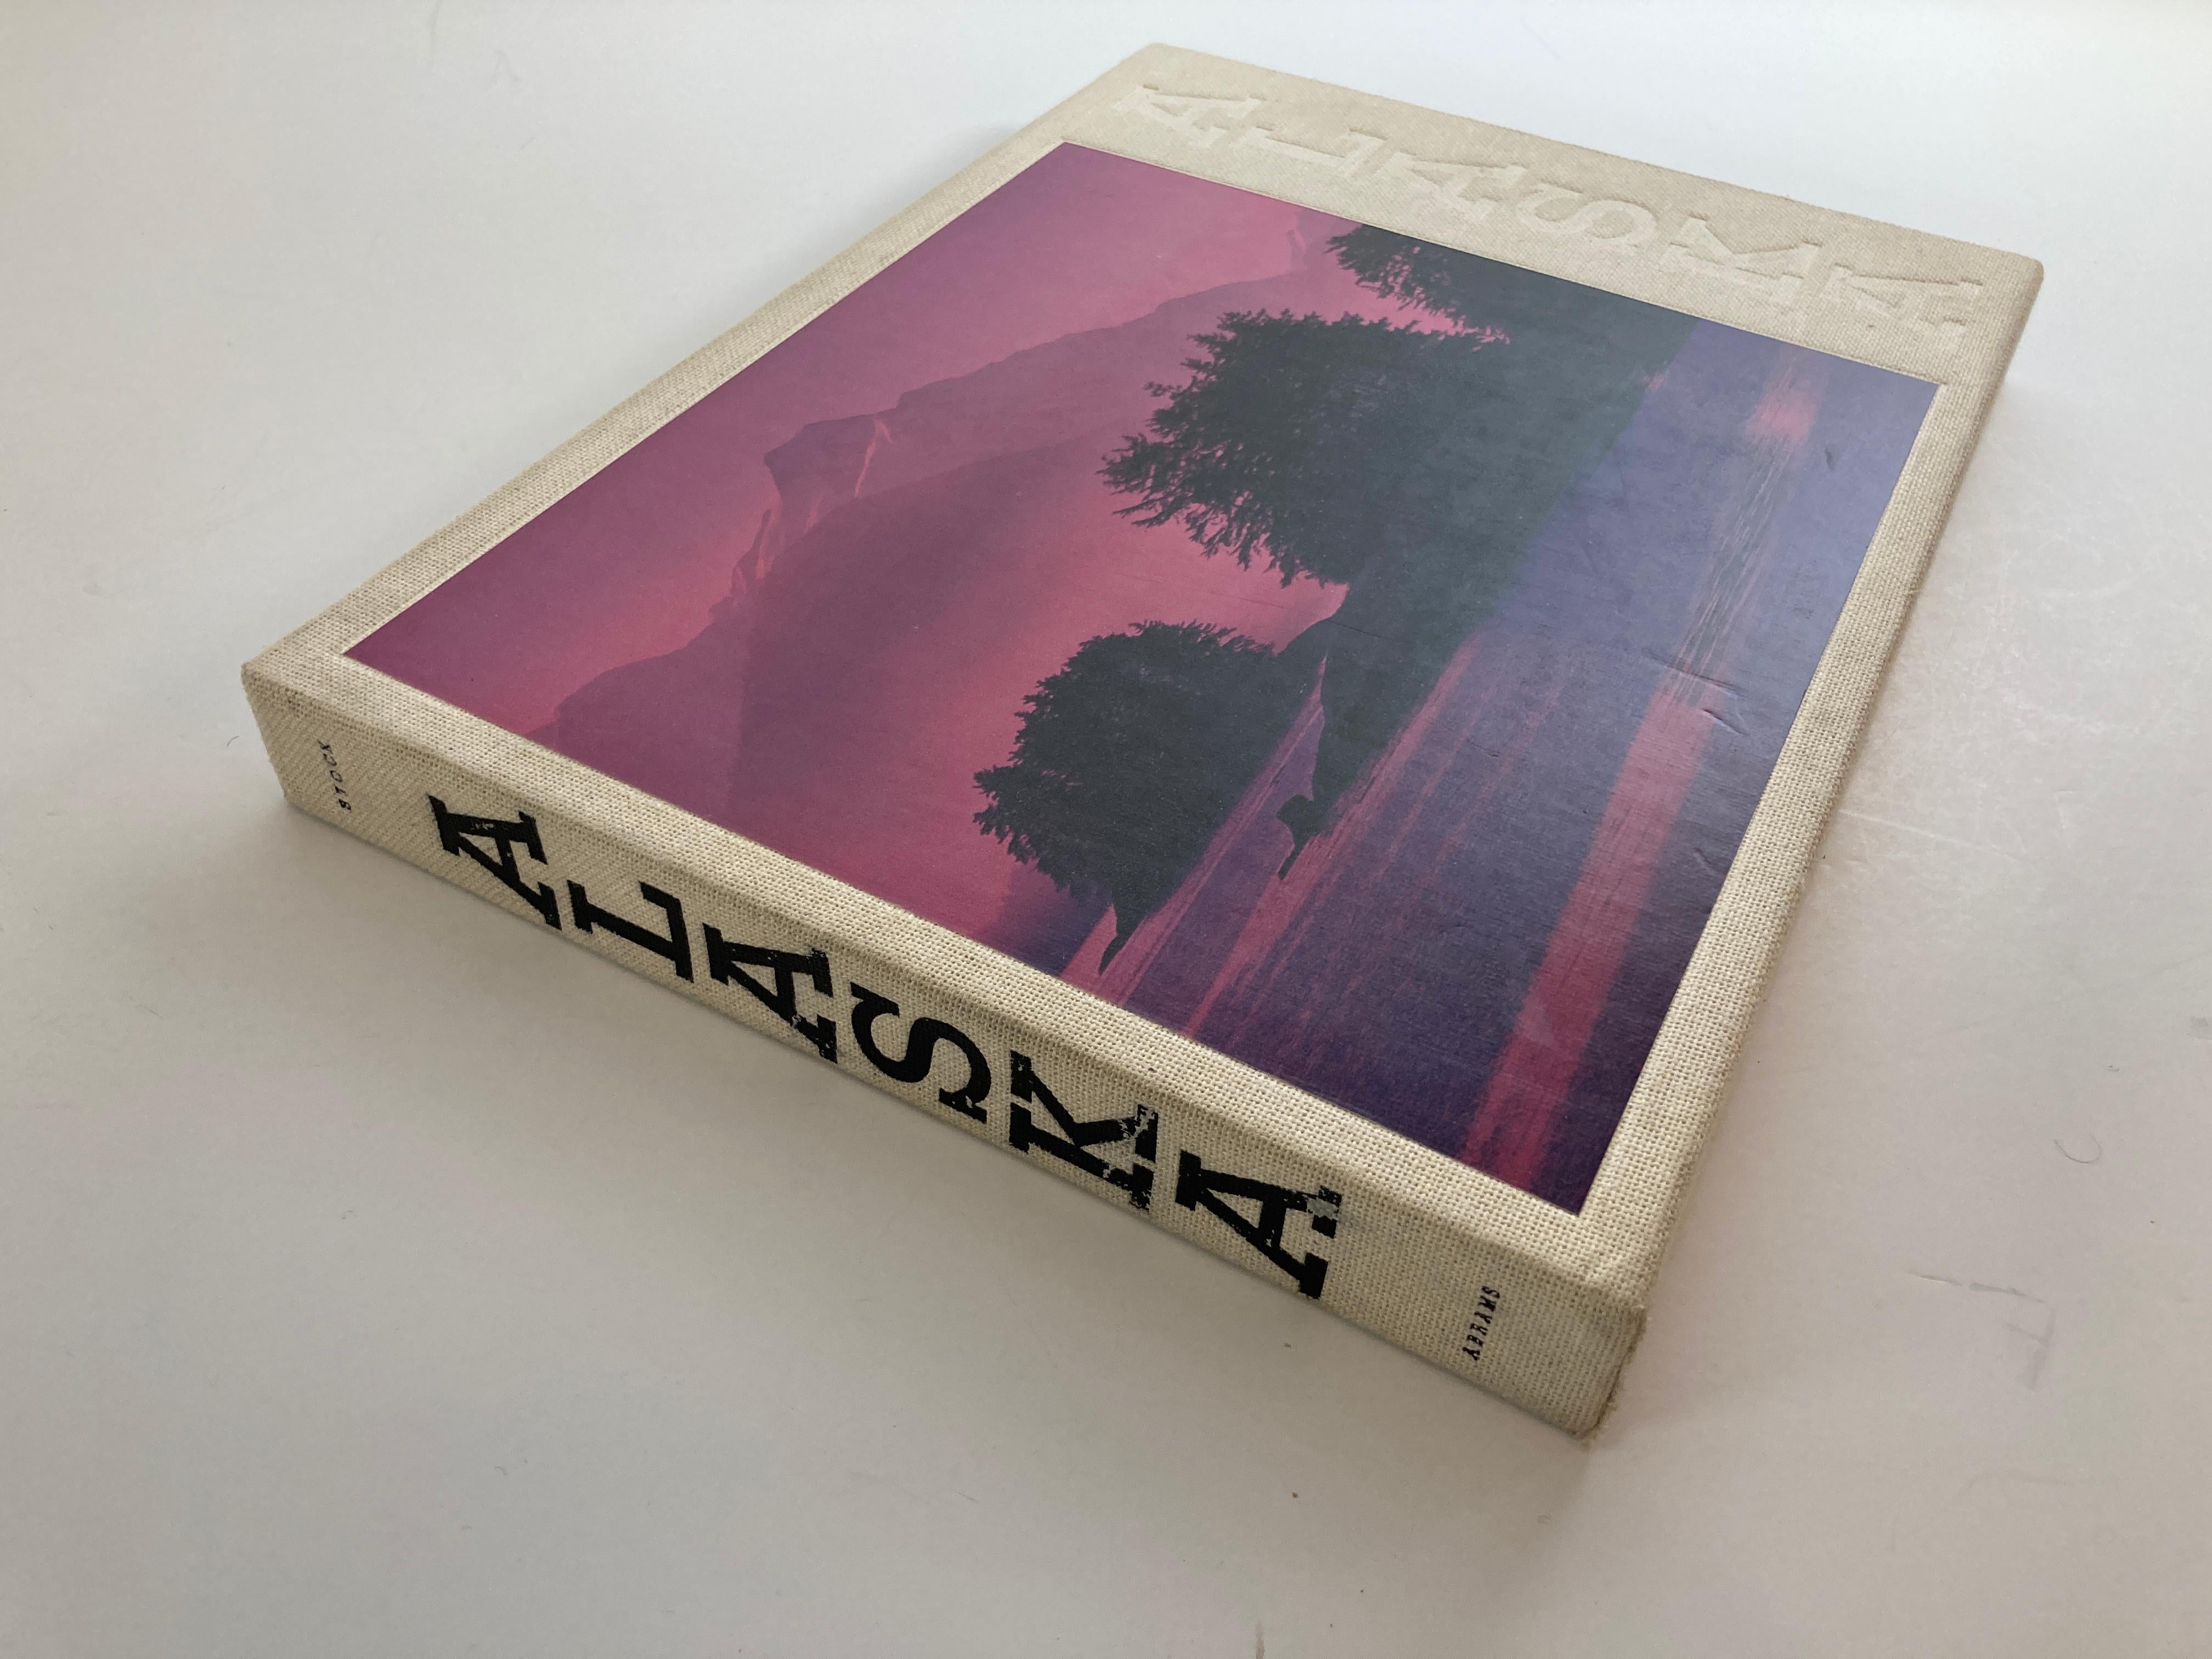 Alaska photo essay by Dennis Stock, Abrams, first edition. 
Hardcover in slipcase published in 1979 by Harry Abrams. 
Beautifully illustrated First edition large oblong hardcover. 
A terrific collection of great photographs of Alaska, showing all